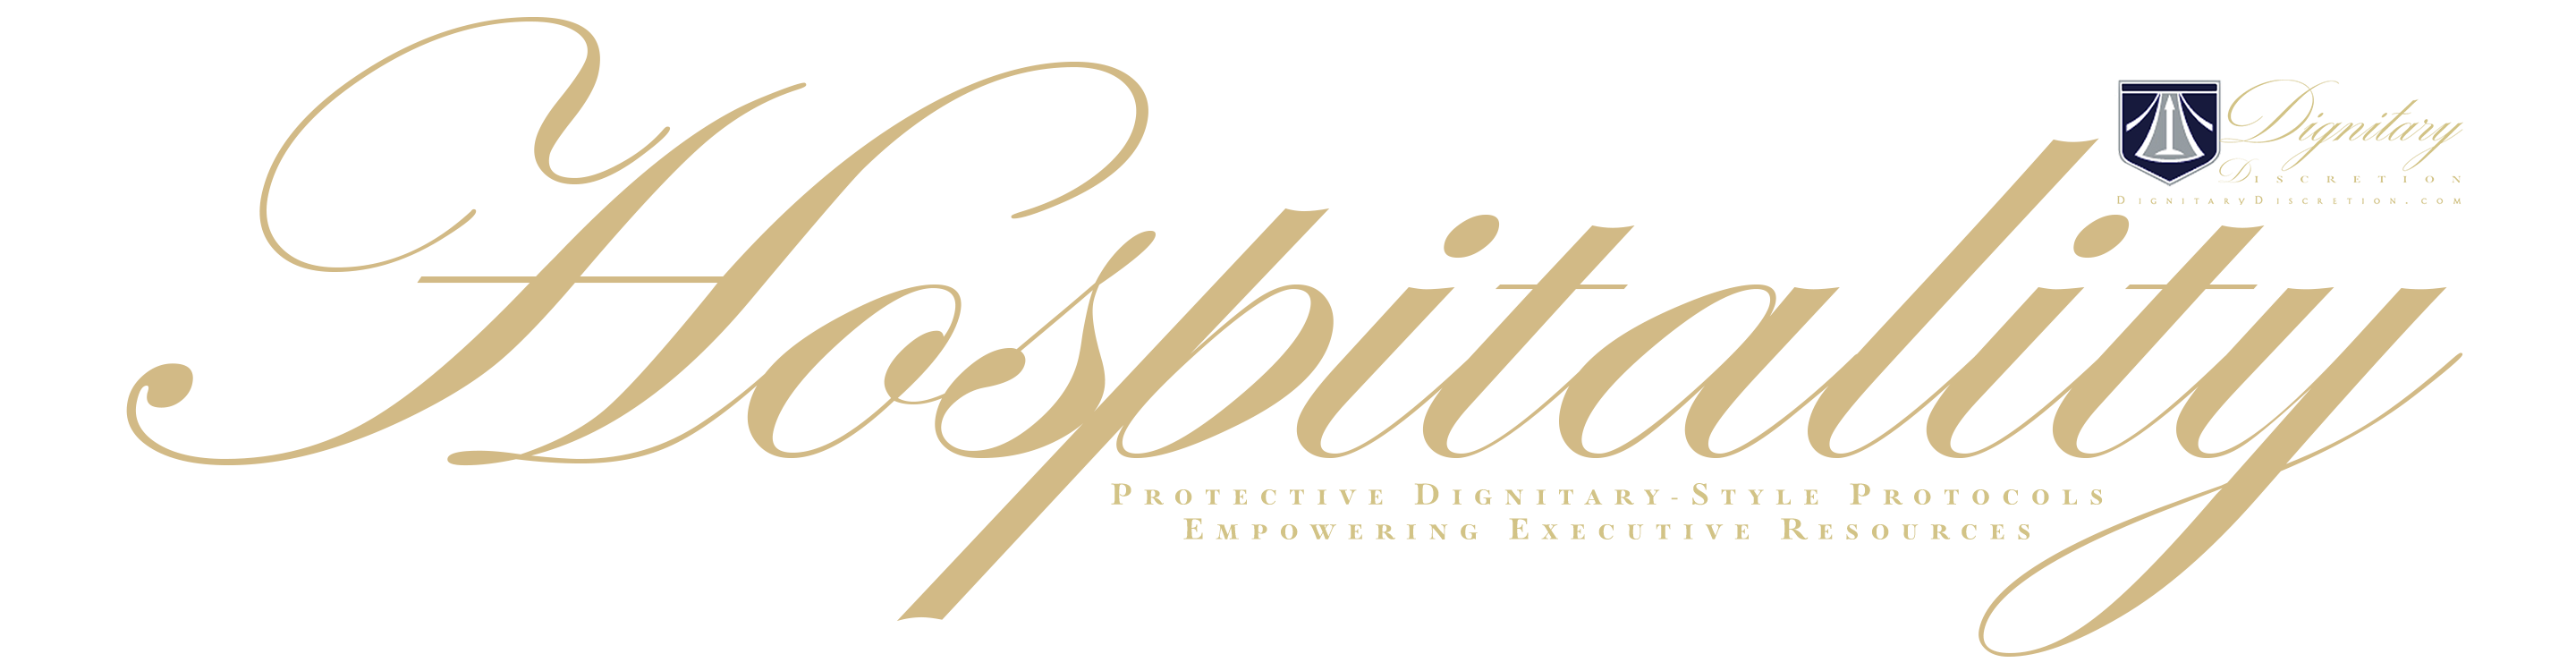 Custom Hospitality Services by Dignitary Discretion